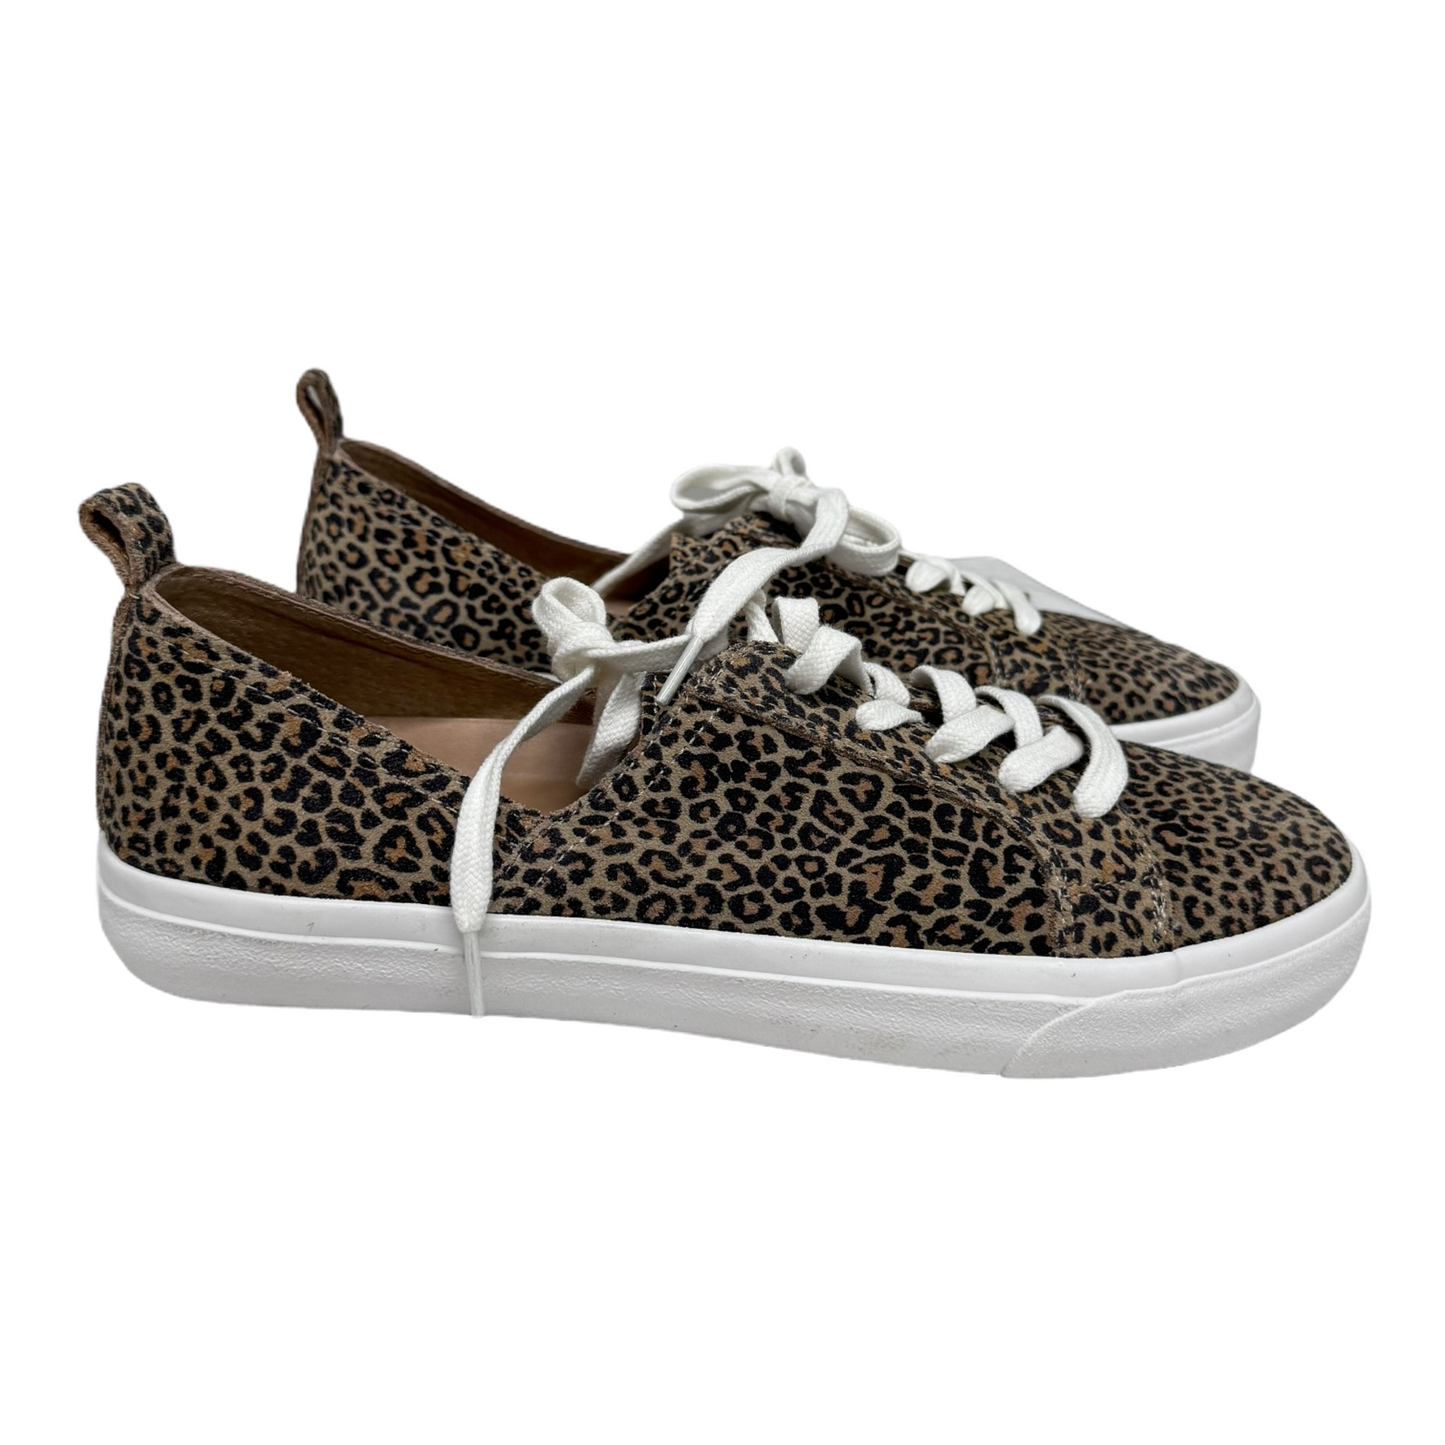 Animal Print Shoes Sneakers By Lucky Brand, Size: 10